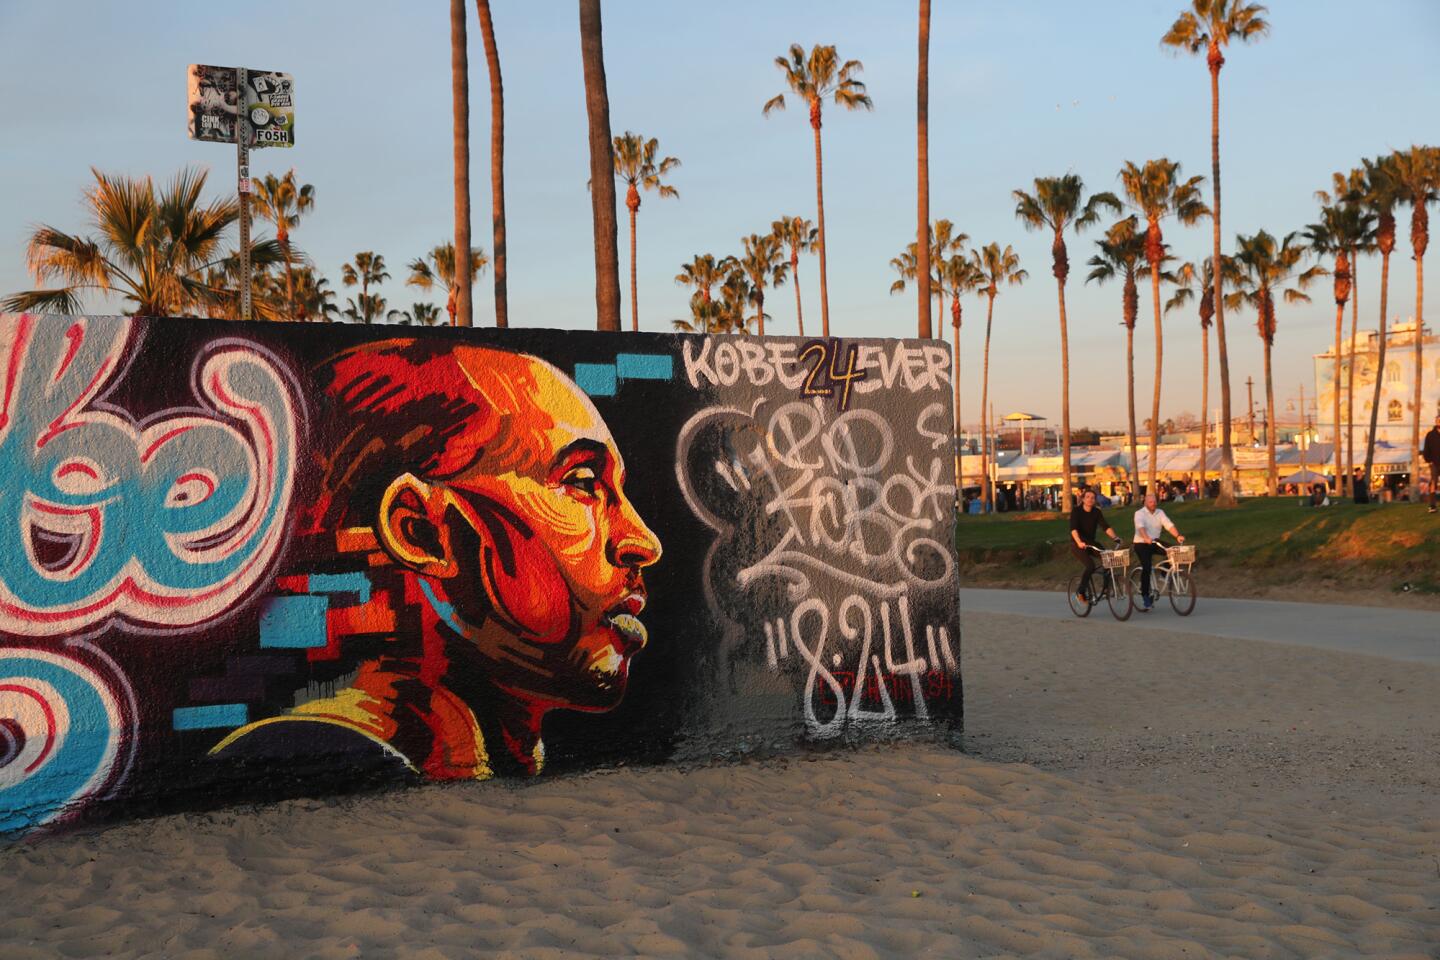 VENICE, CALIF. -- FRIDAY, JANUARY 31, 2020: A mural of Kobe Bryant glows in the late afternoon sun on a wall along the bike path in Venice, Calif., on Jan. 31, 2020. (Brian van der Brug / Los Angeles Times)